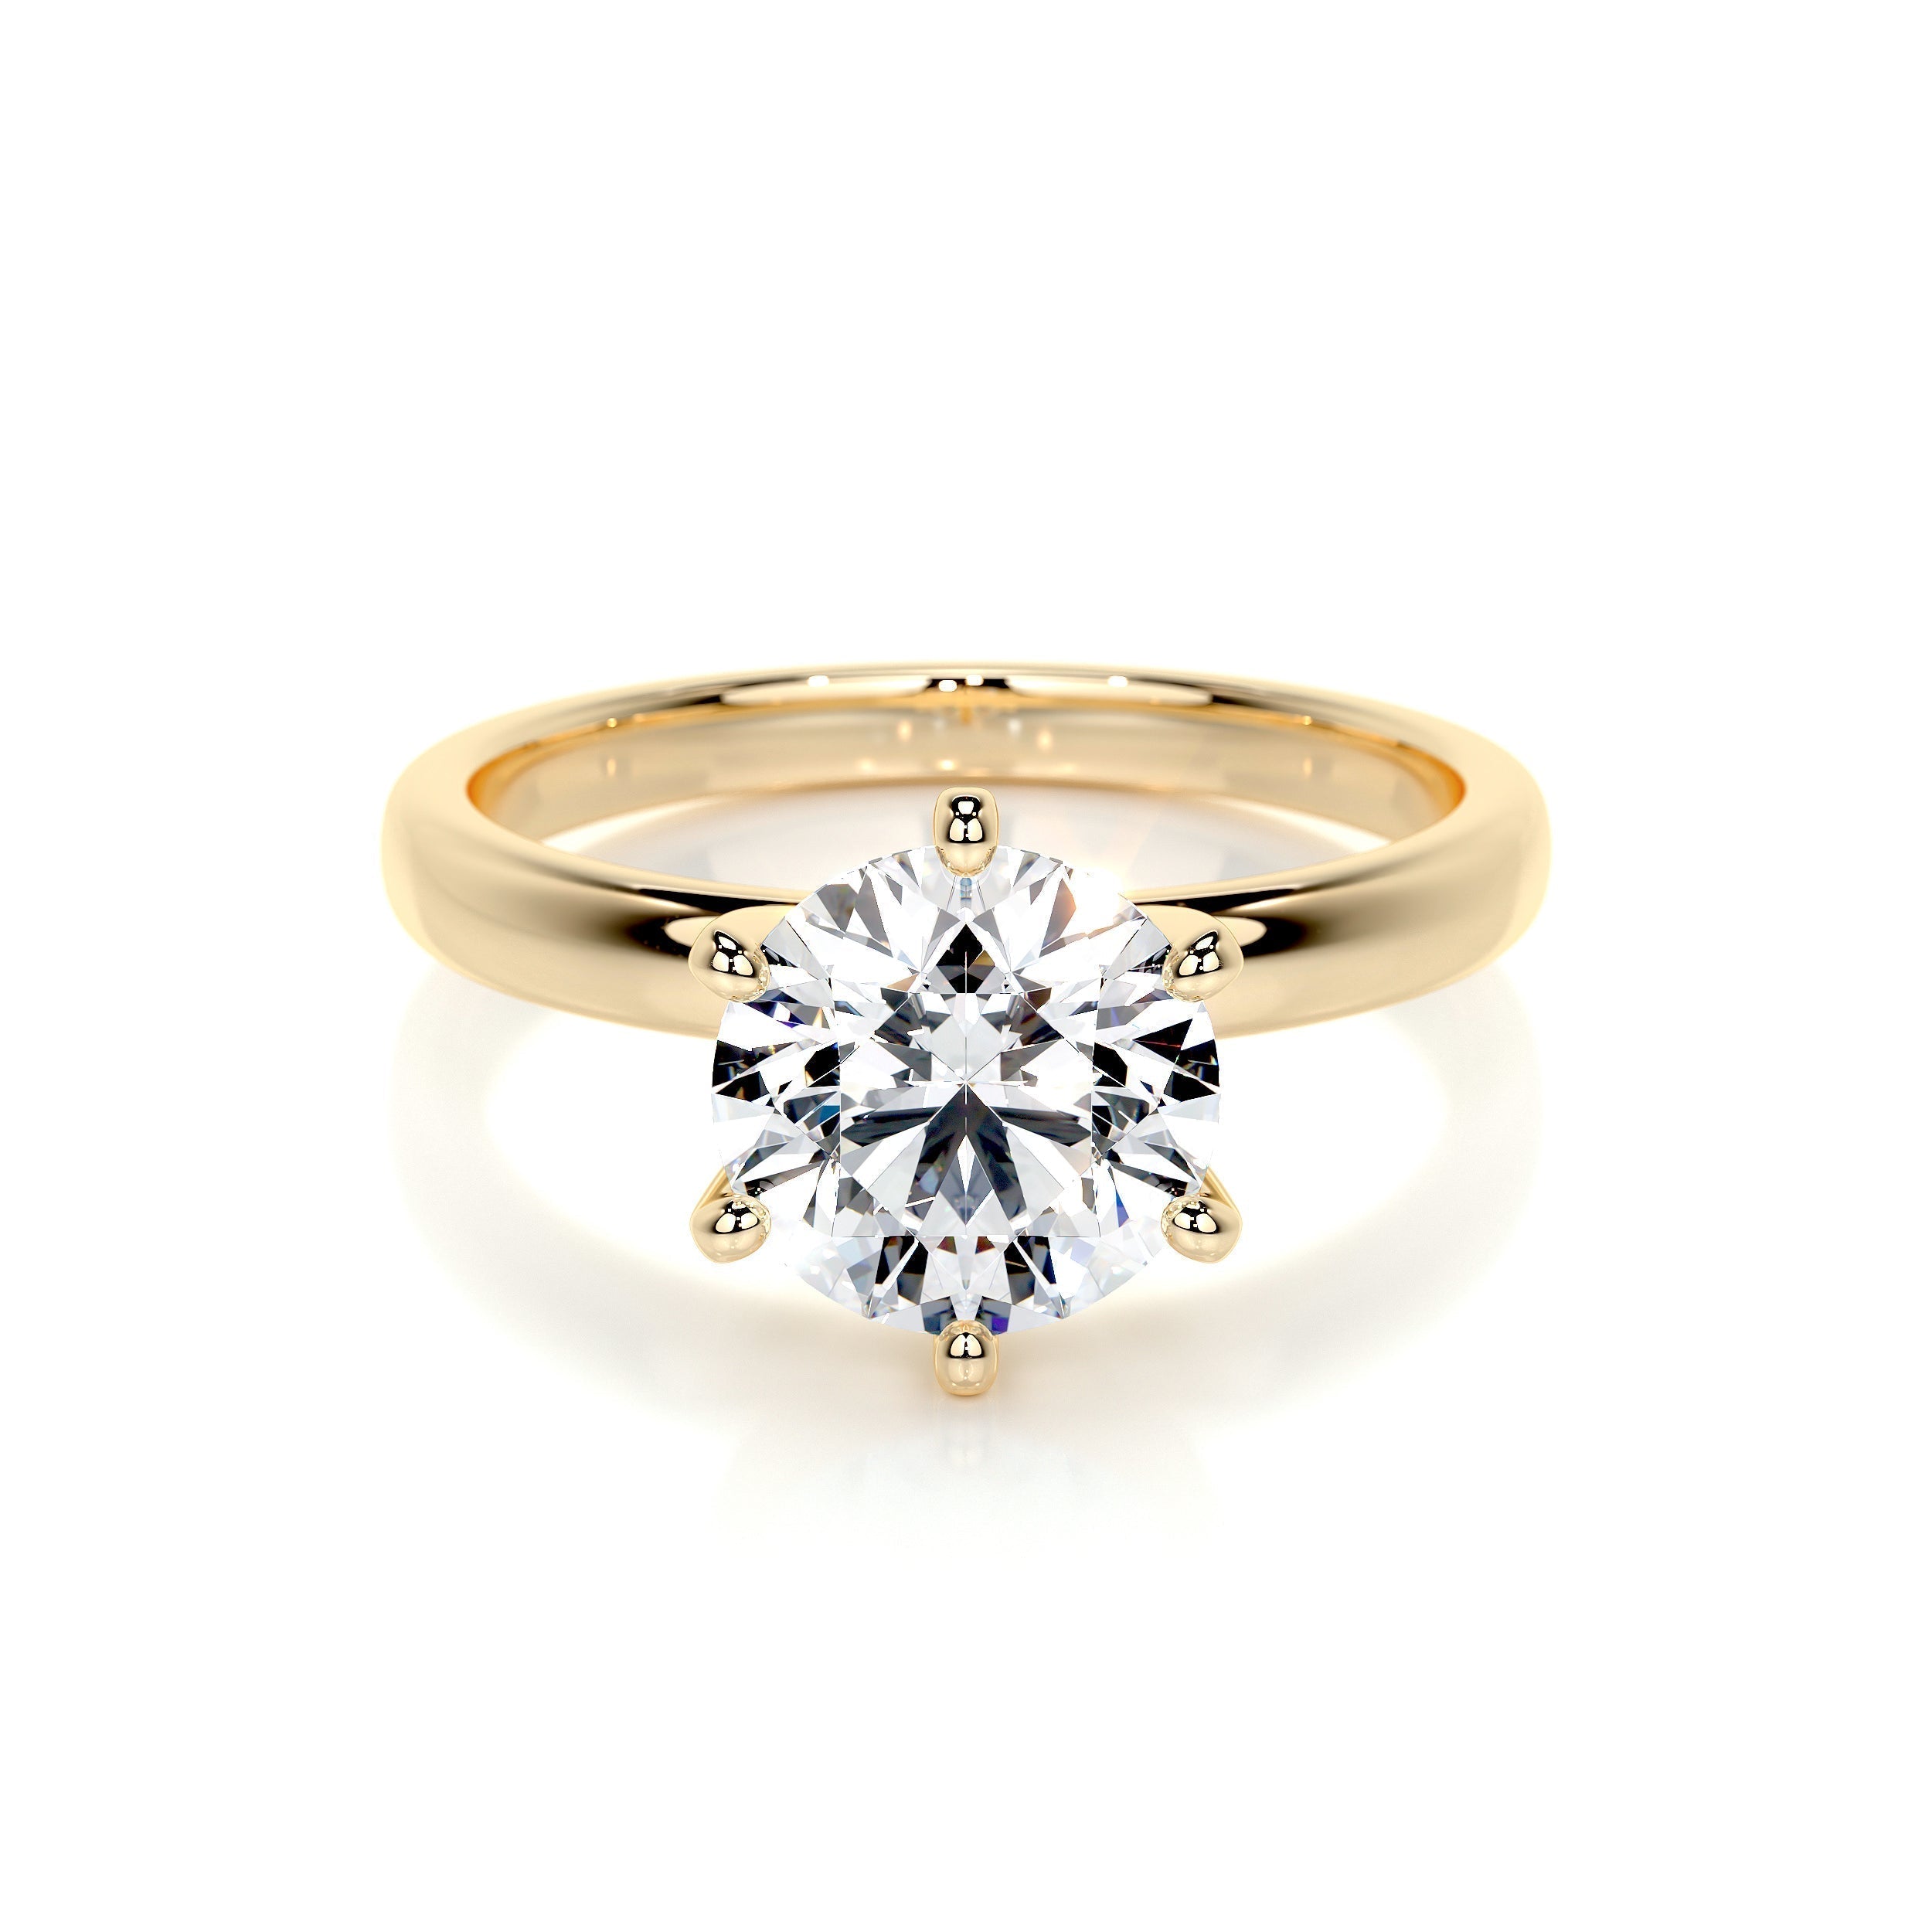 2.0 CT Round Solitaire CVD E/VS2 Diamond Engagement Ring 7